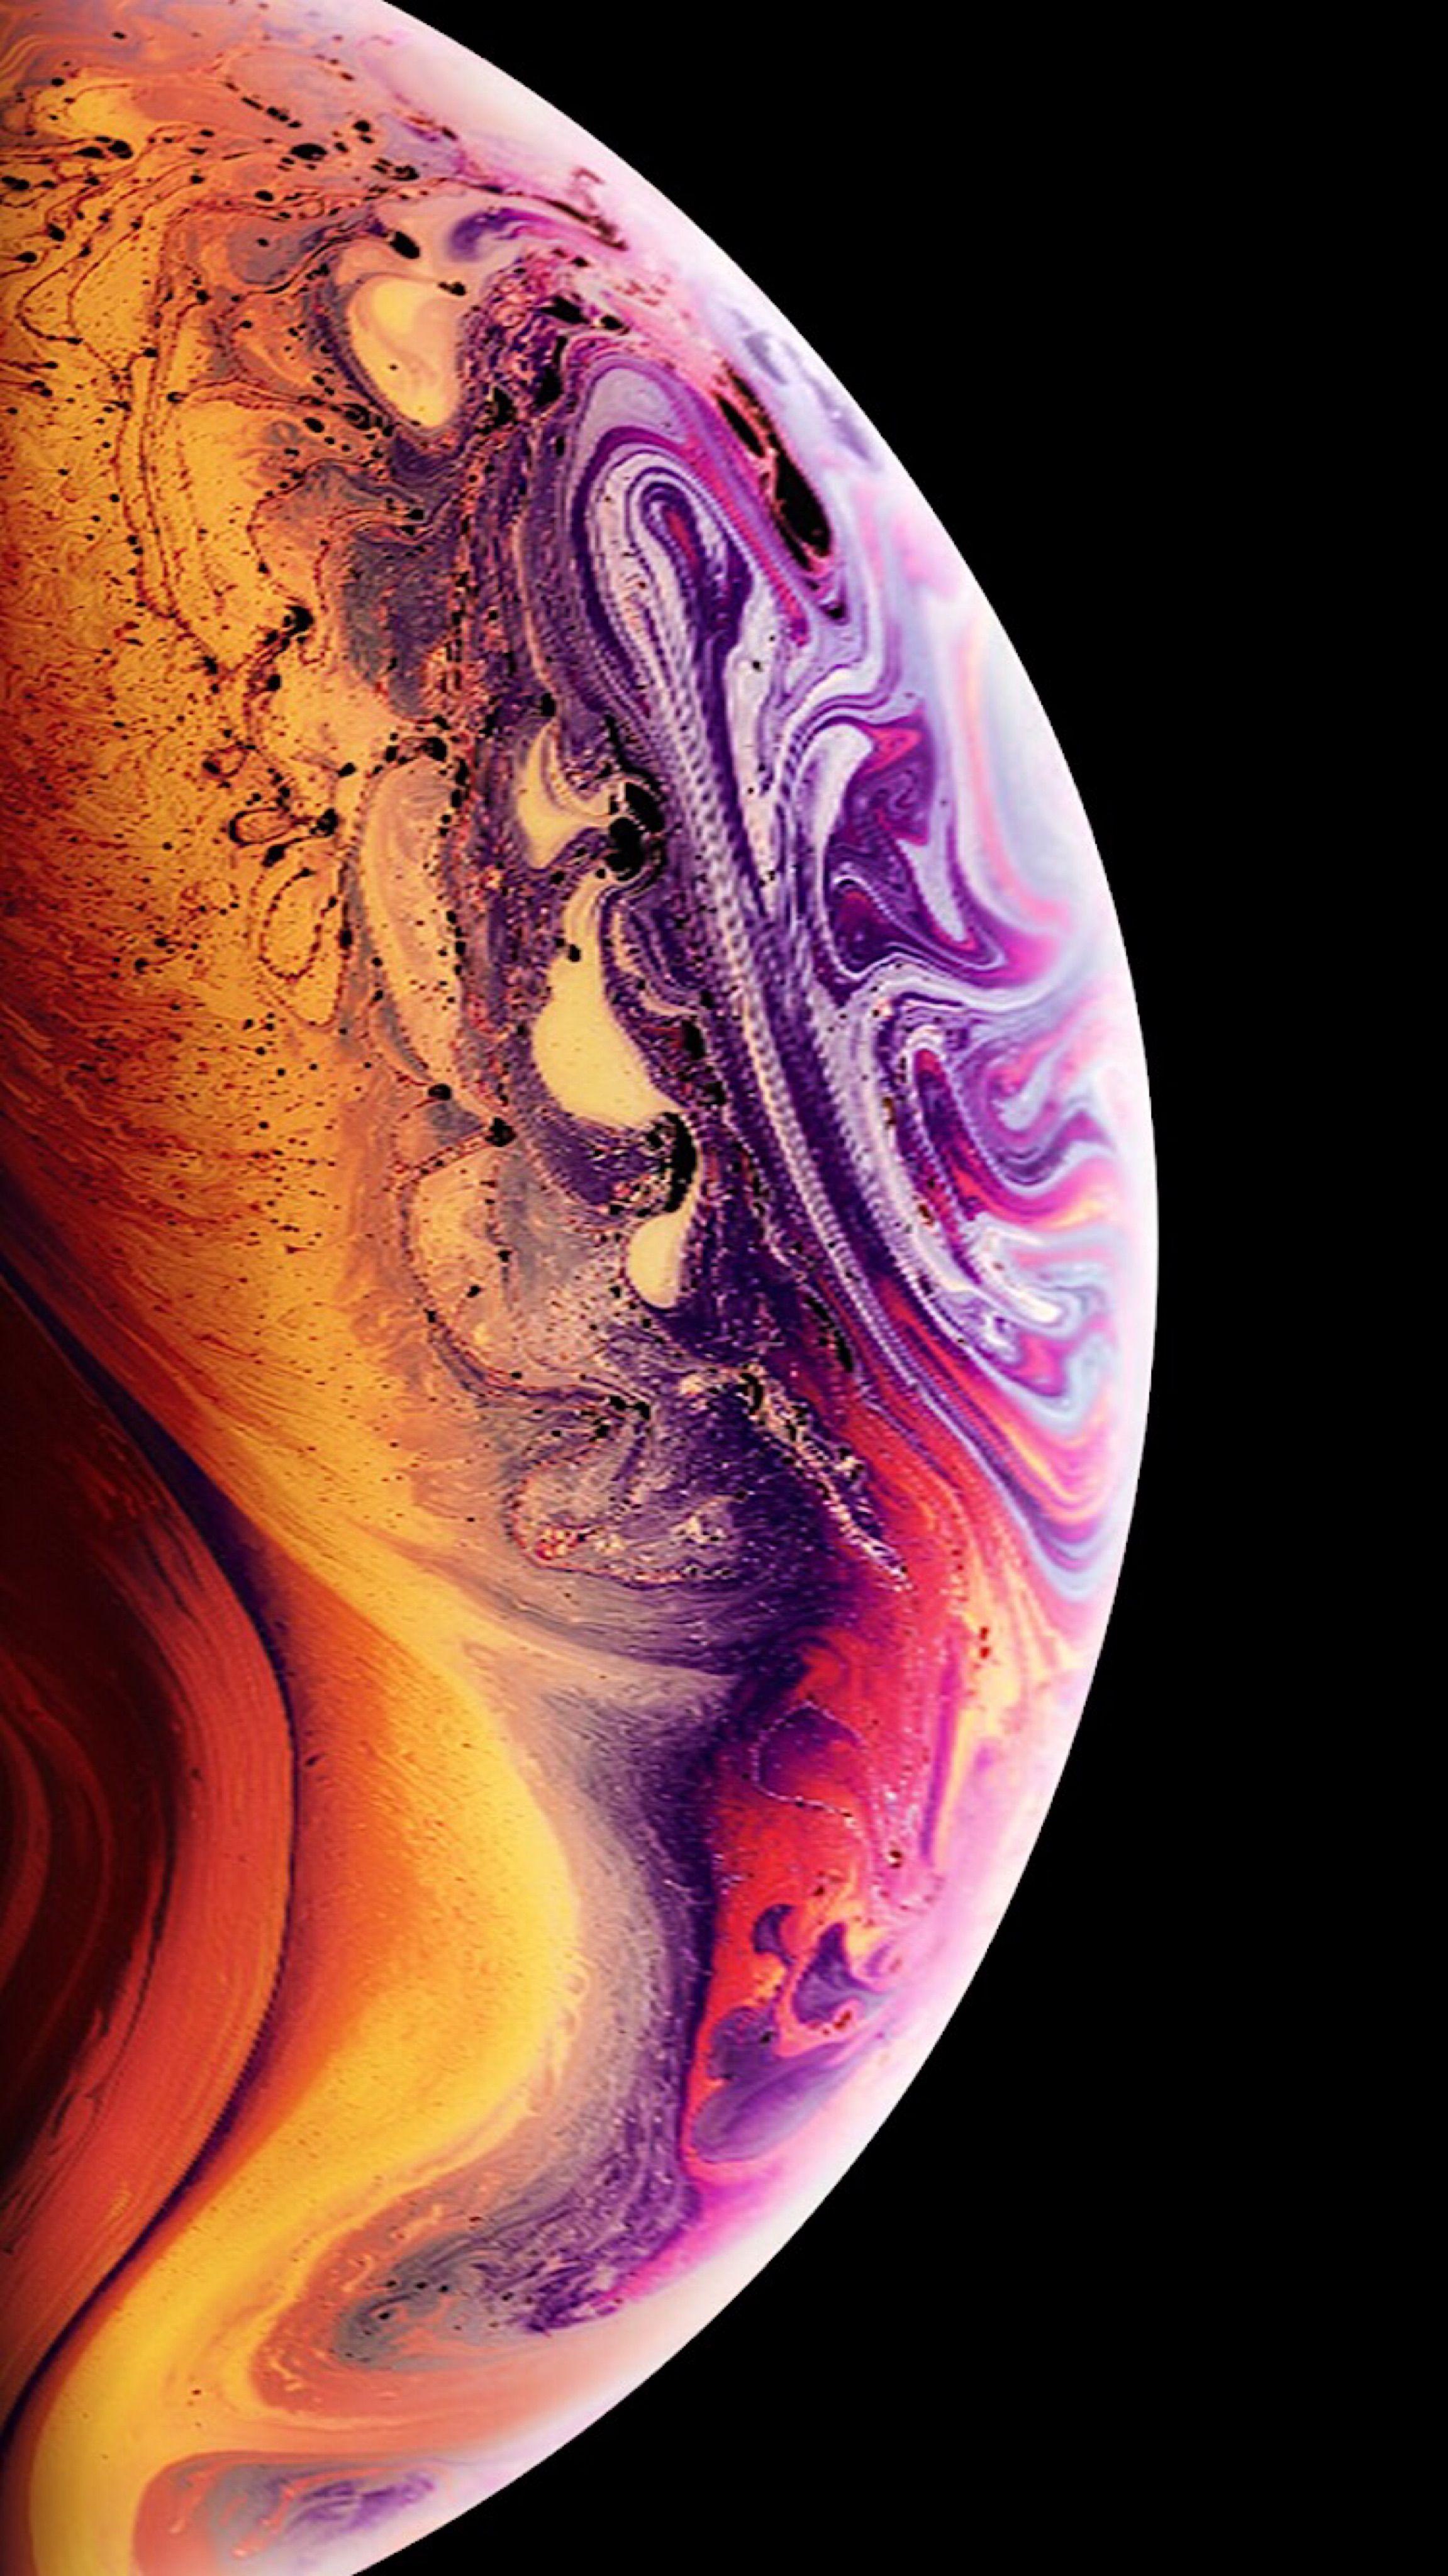 iPhone XS and XS Max Wallpaper in High Quality for Download